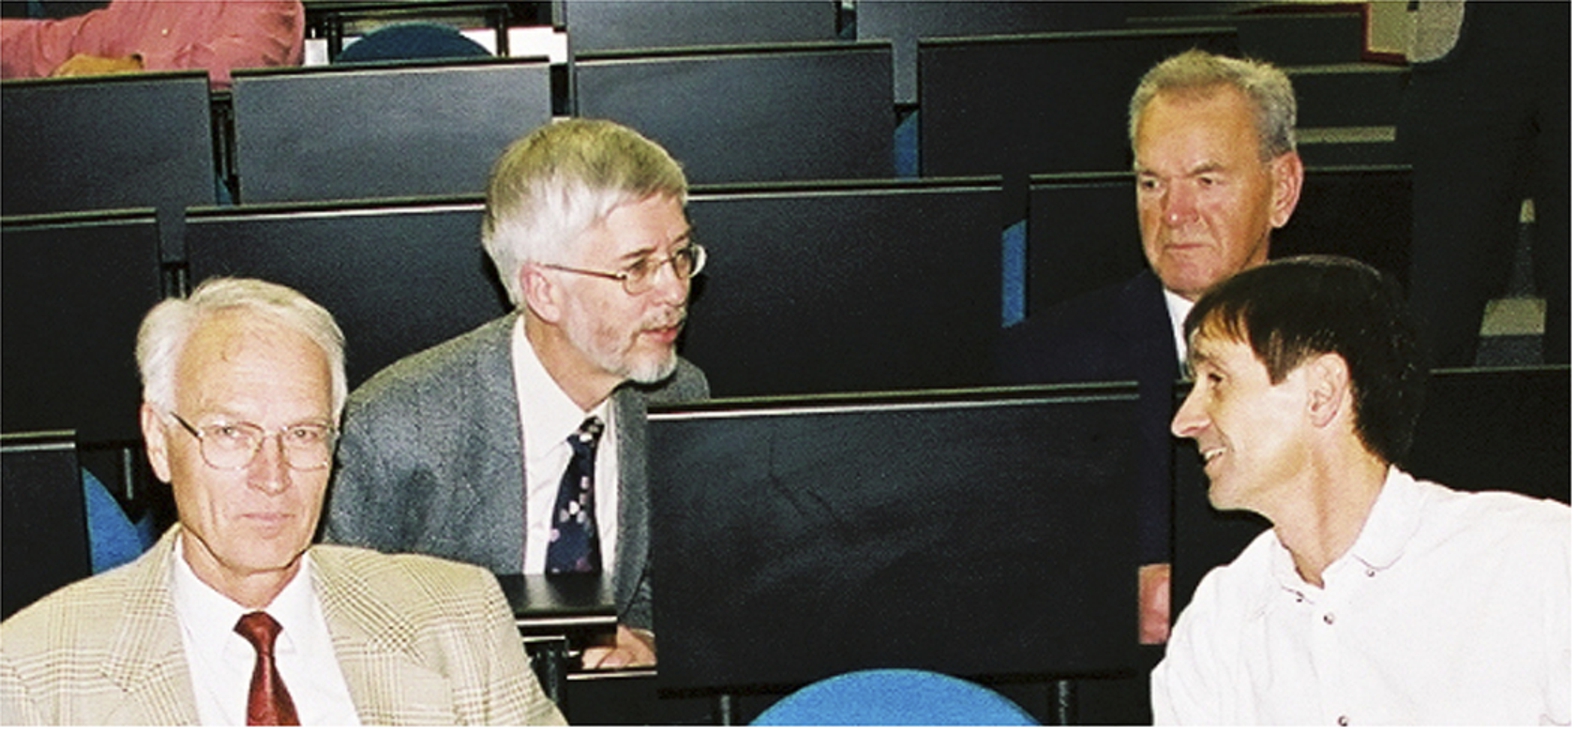 The BS clan: from left to right: Anton Heidemann, Michel Prager, Bert Alefeld, and Bernard Frick, at the ILL in (2003).